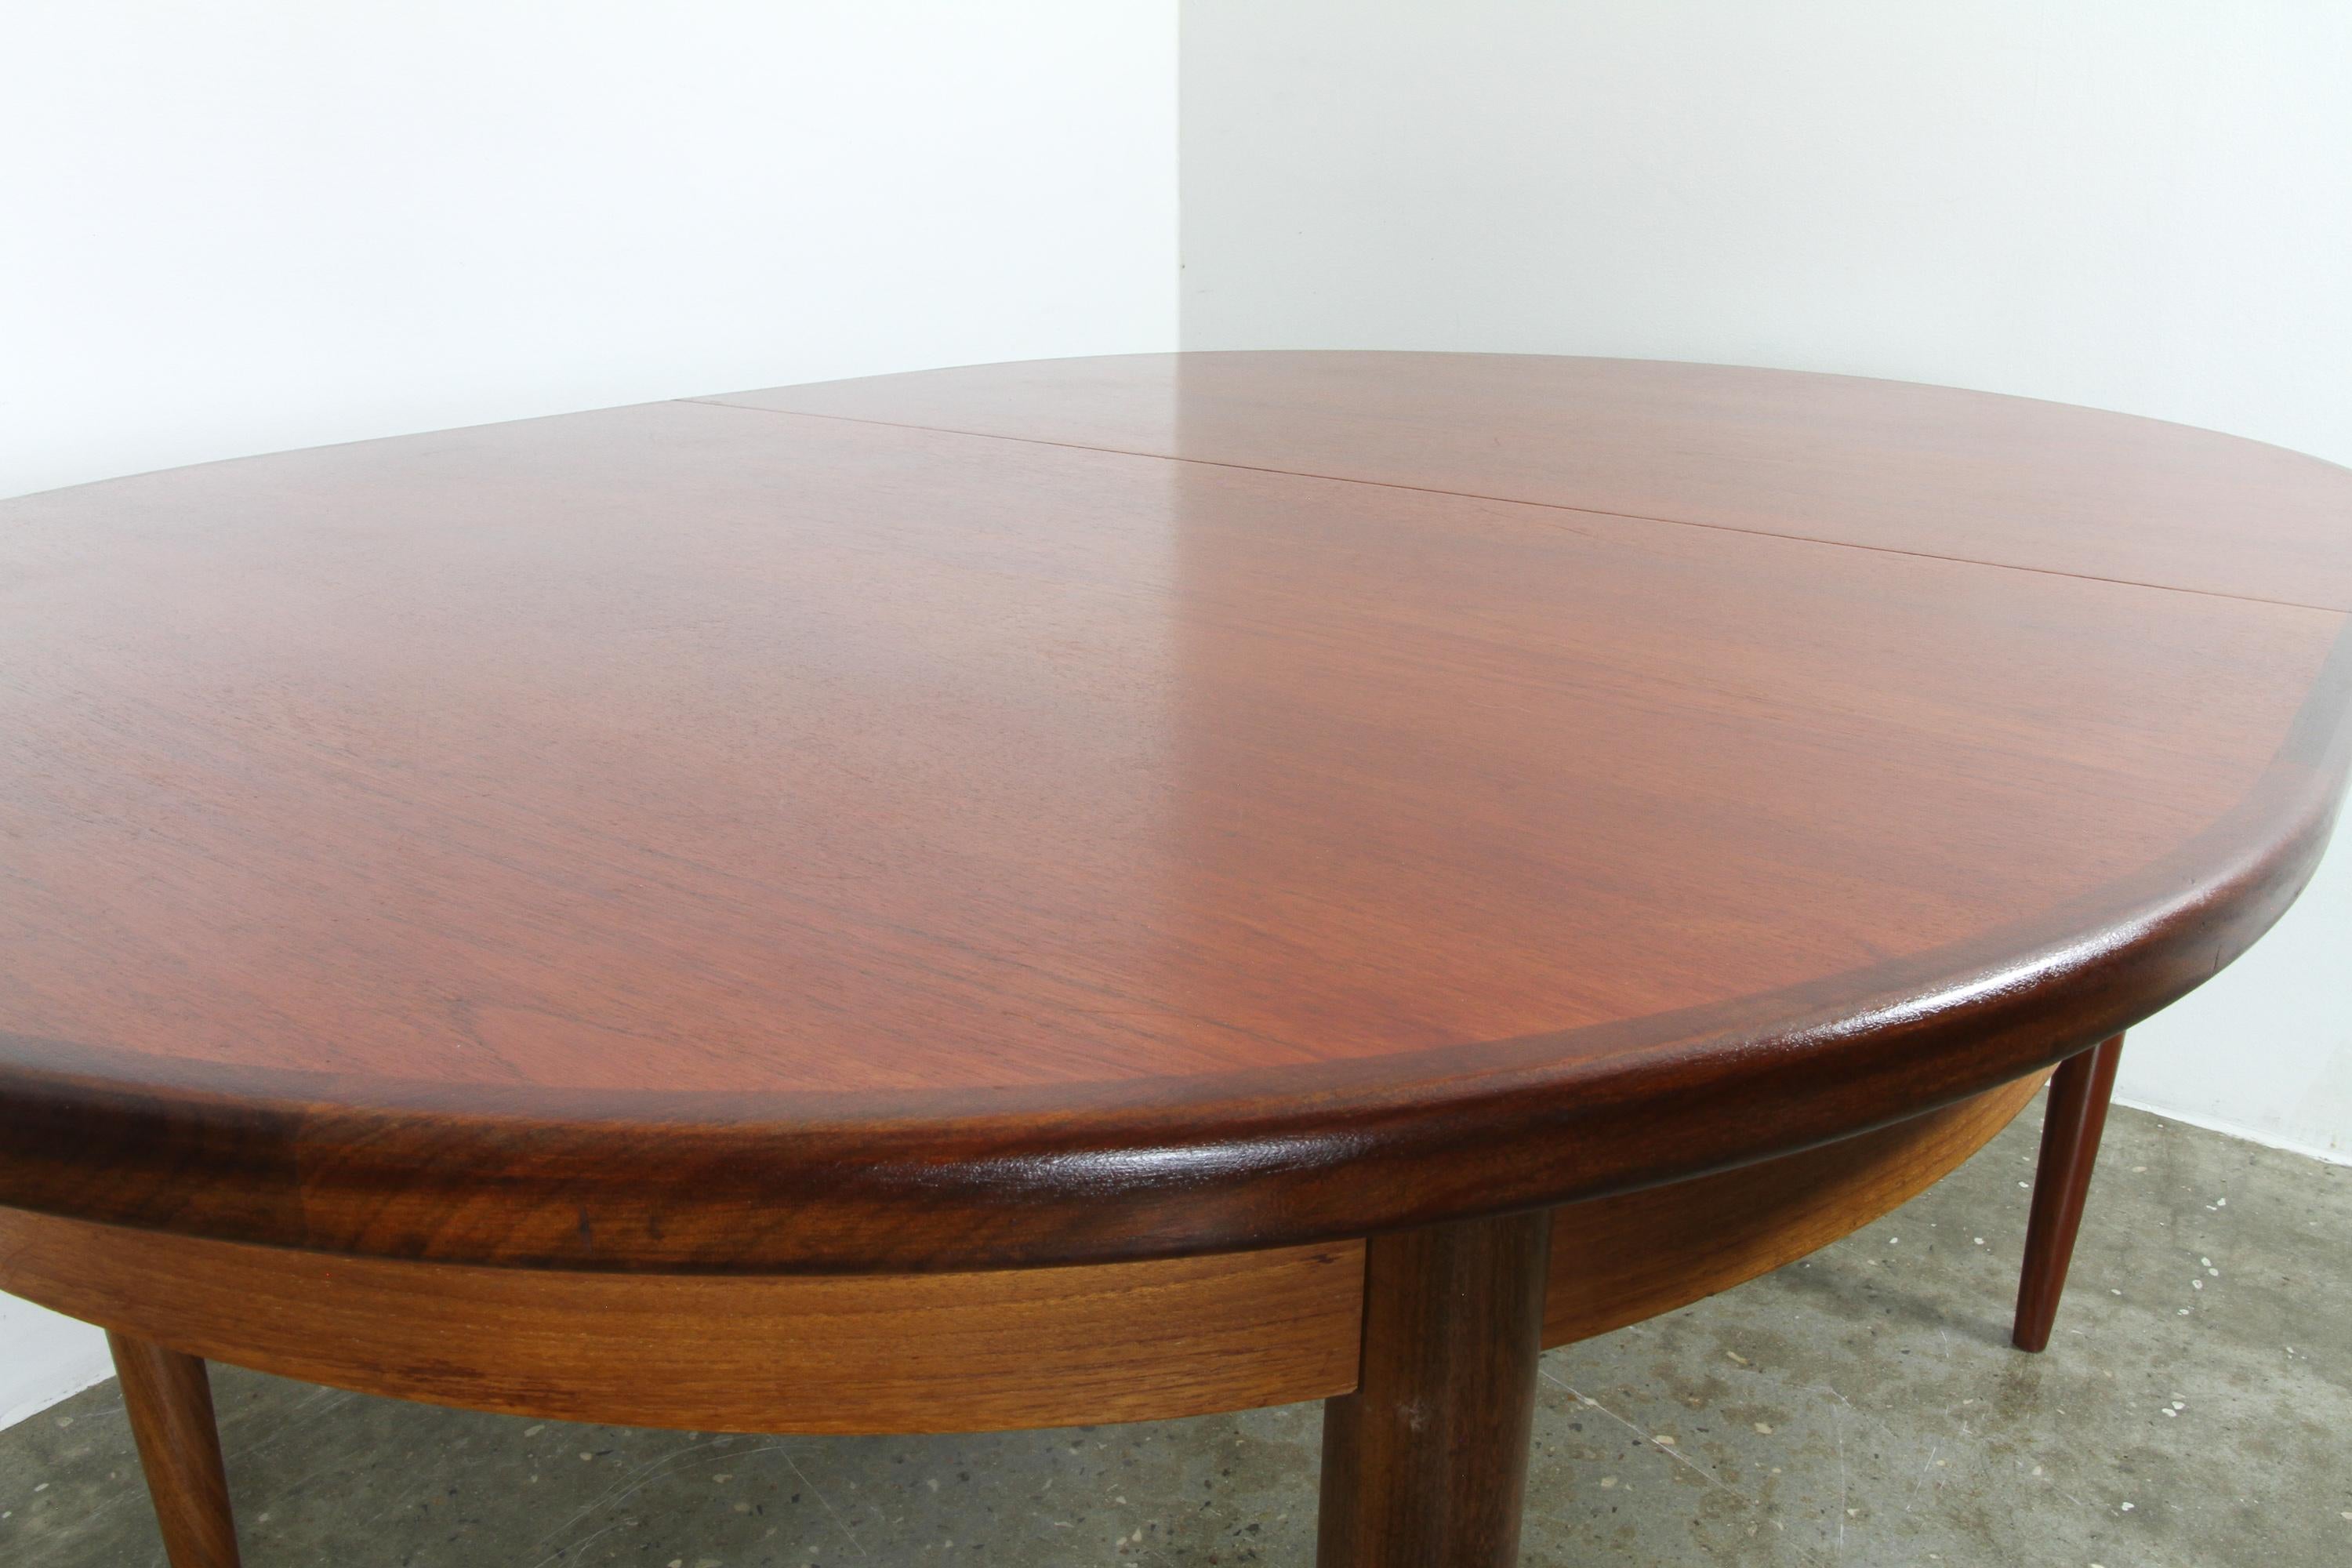 Scandinavian Modern Vintage Oval Extendable Teak and Redwood Dining Table by G-Plan, 1960s